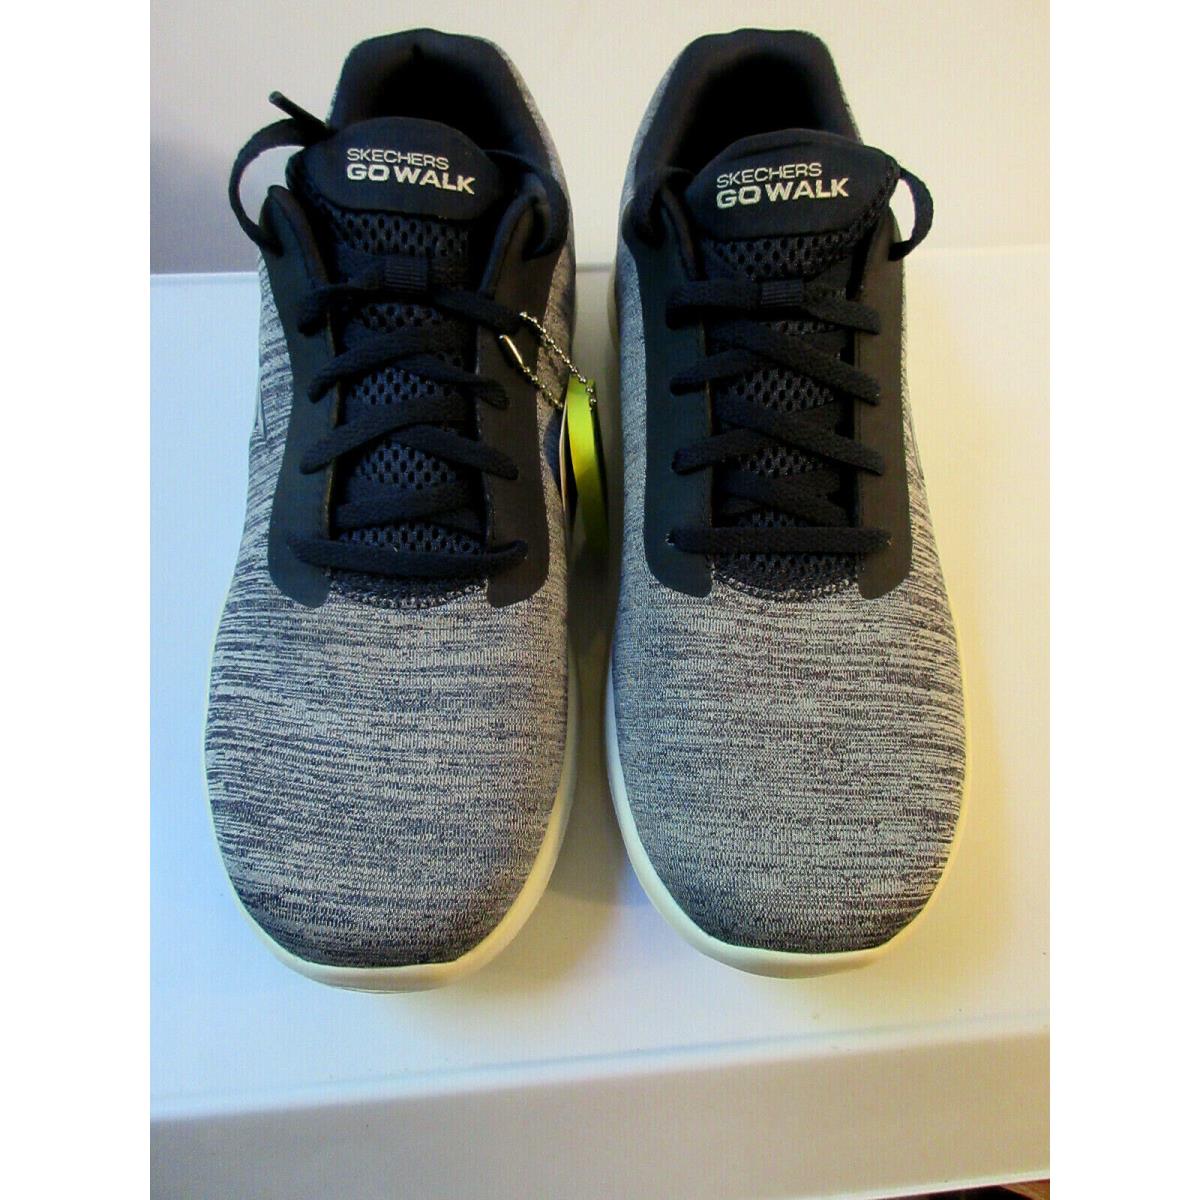 Skechers shoes Air Cooled GoGA Mat - Gray 4